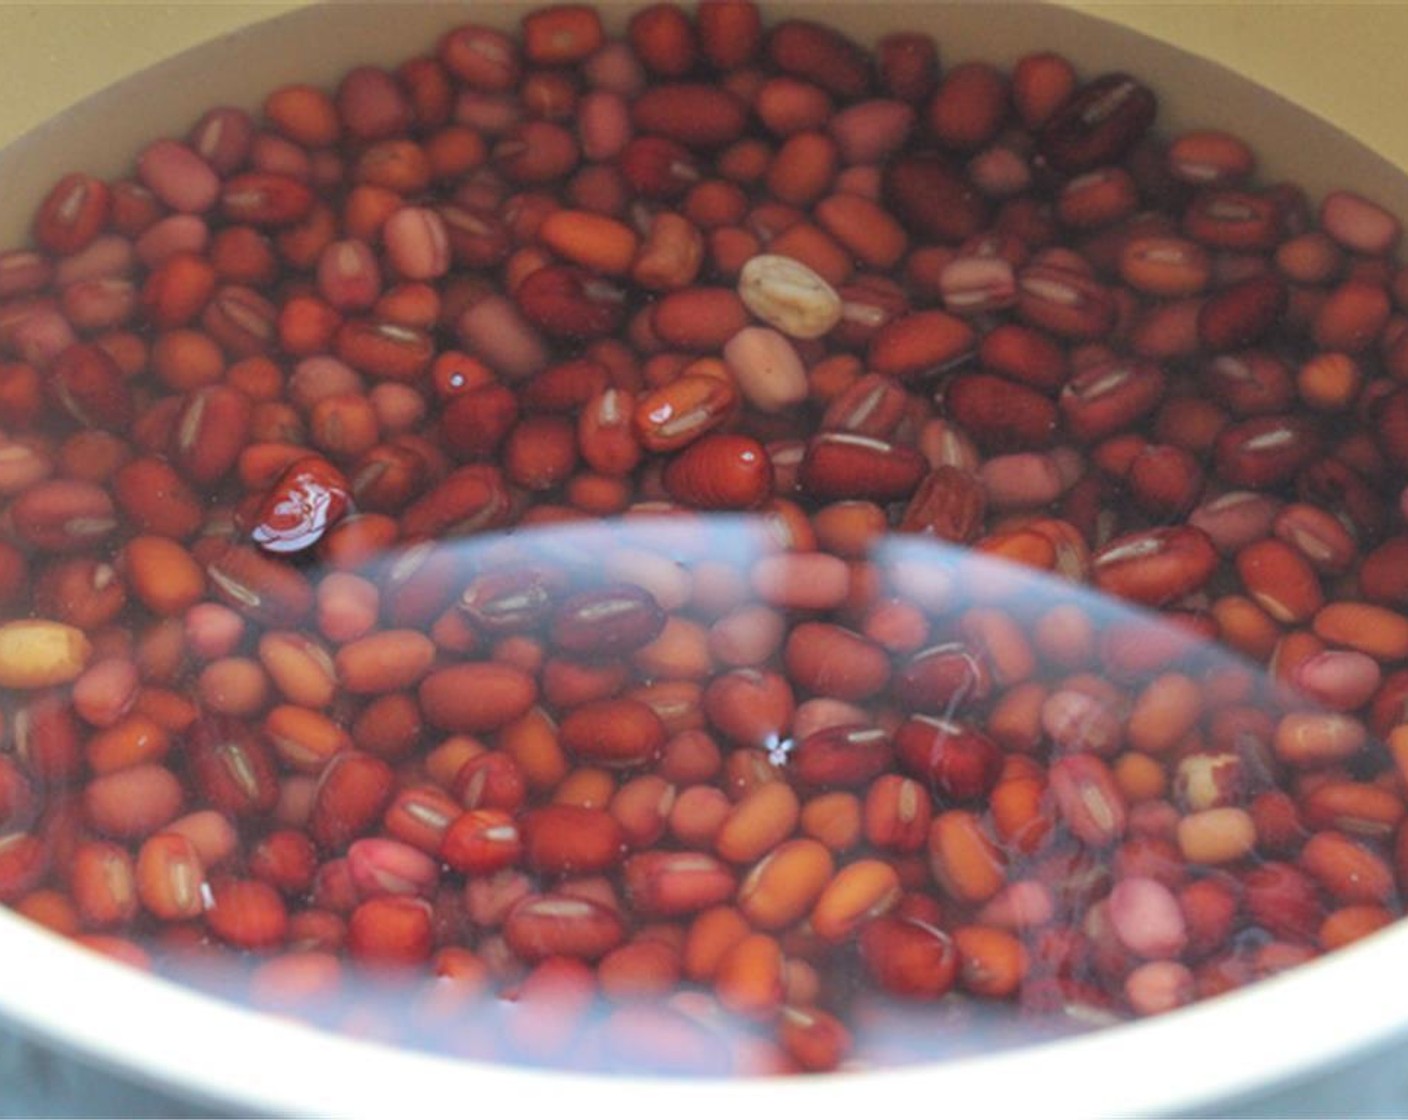 step 2 Remove the beans that float to the surface. Add Water (3 cups) and beans to a pressure cooker. The water should cover the beans. Bring the mixture to a boil then lower the heat to a gentle simmer.